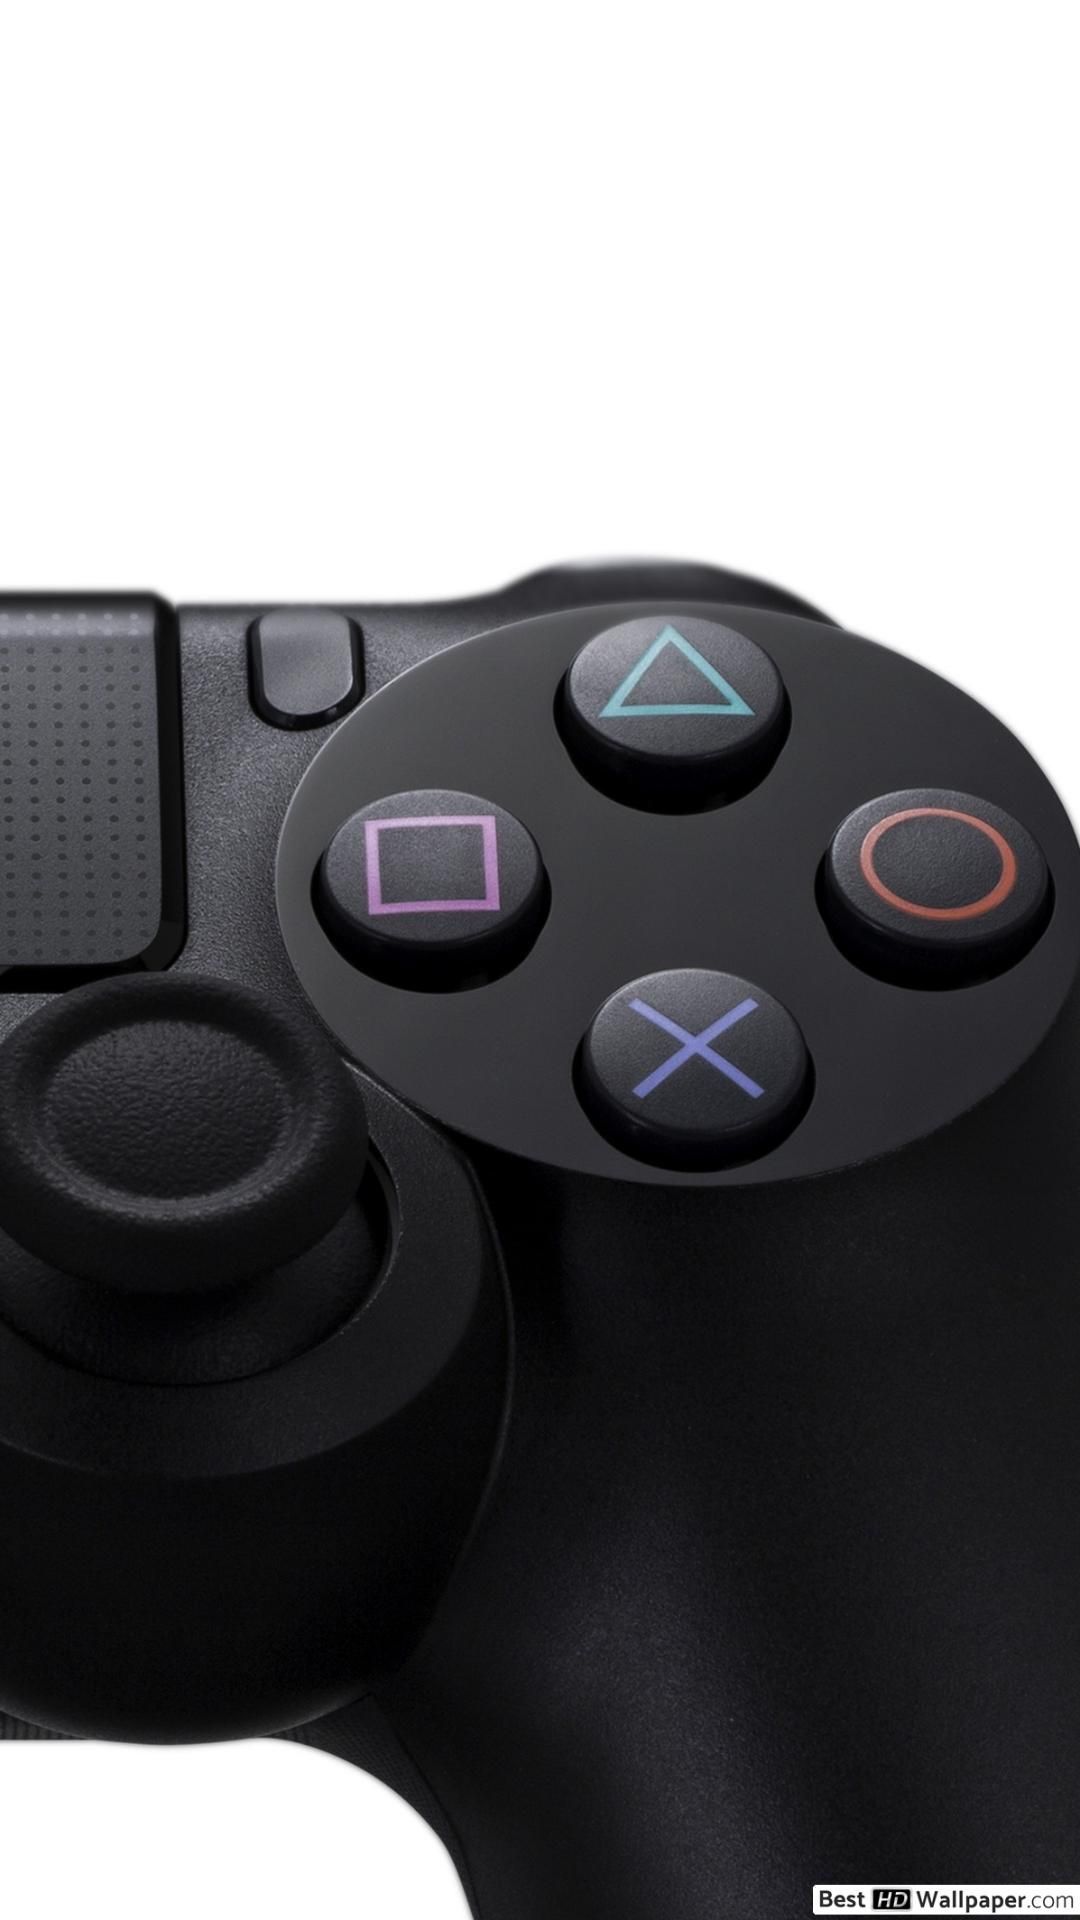 Ps4 Controller iPhone Background. Ps4 controller, iPhone